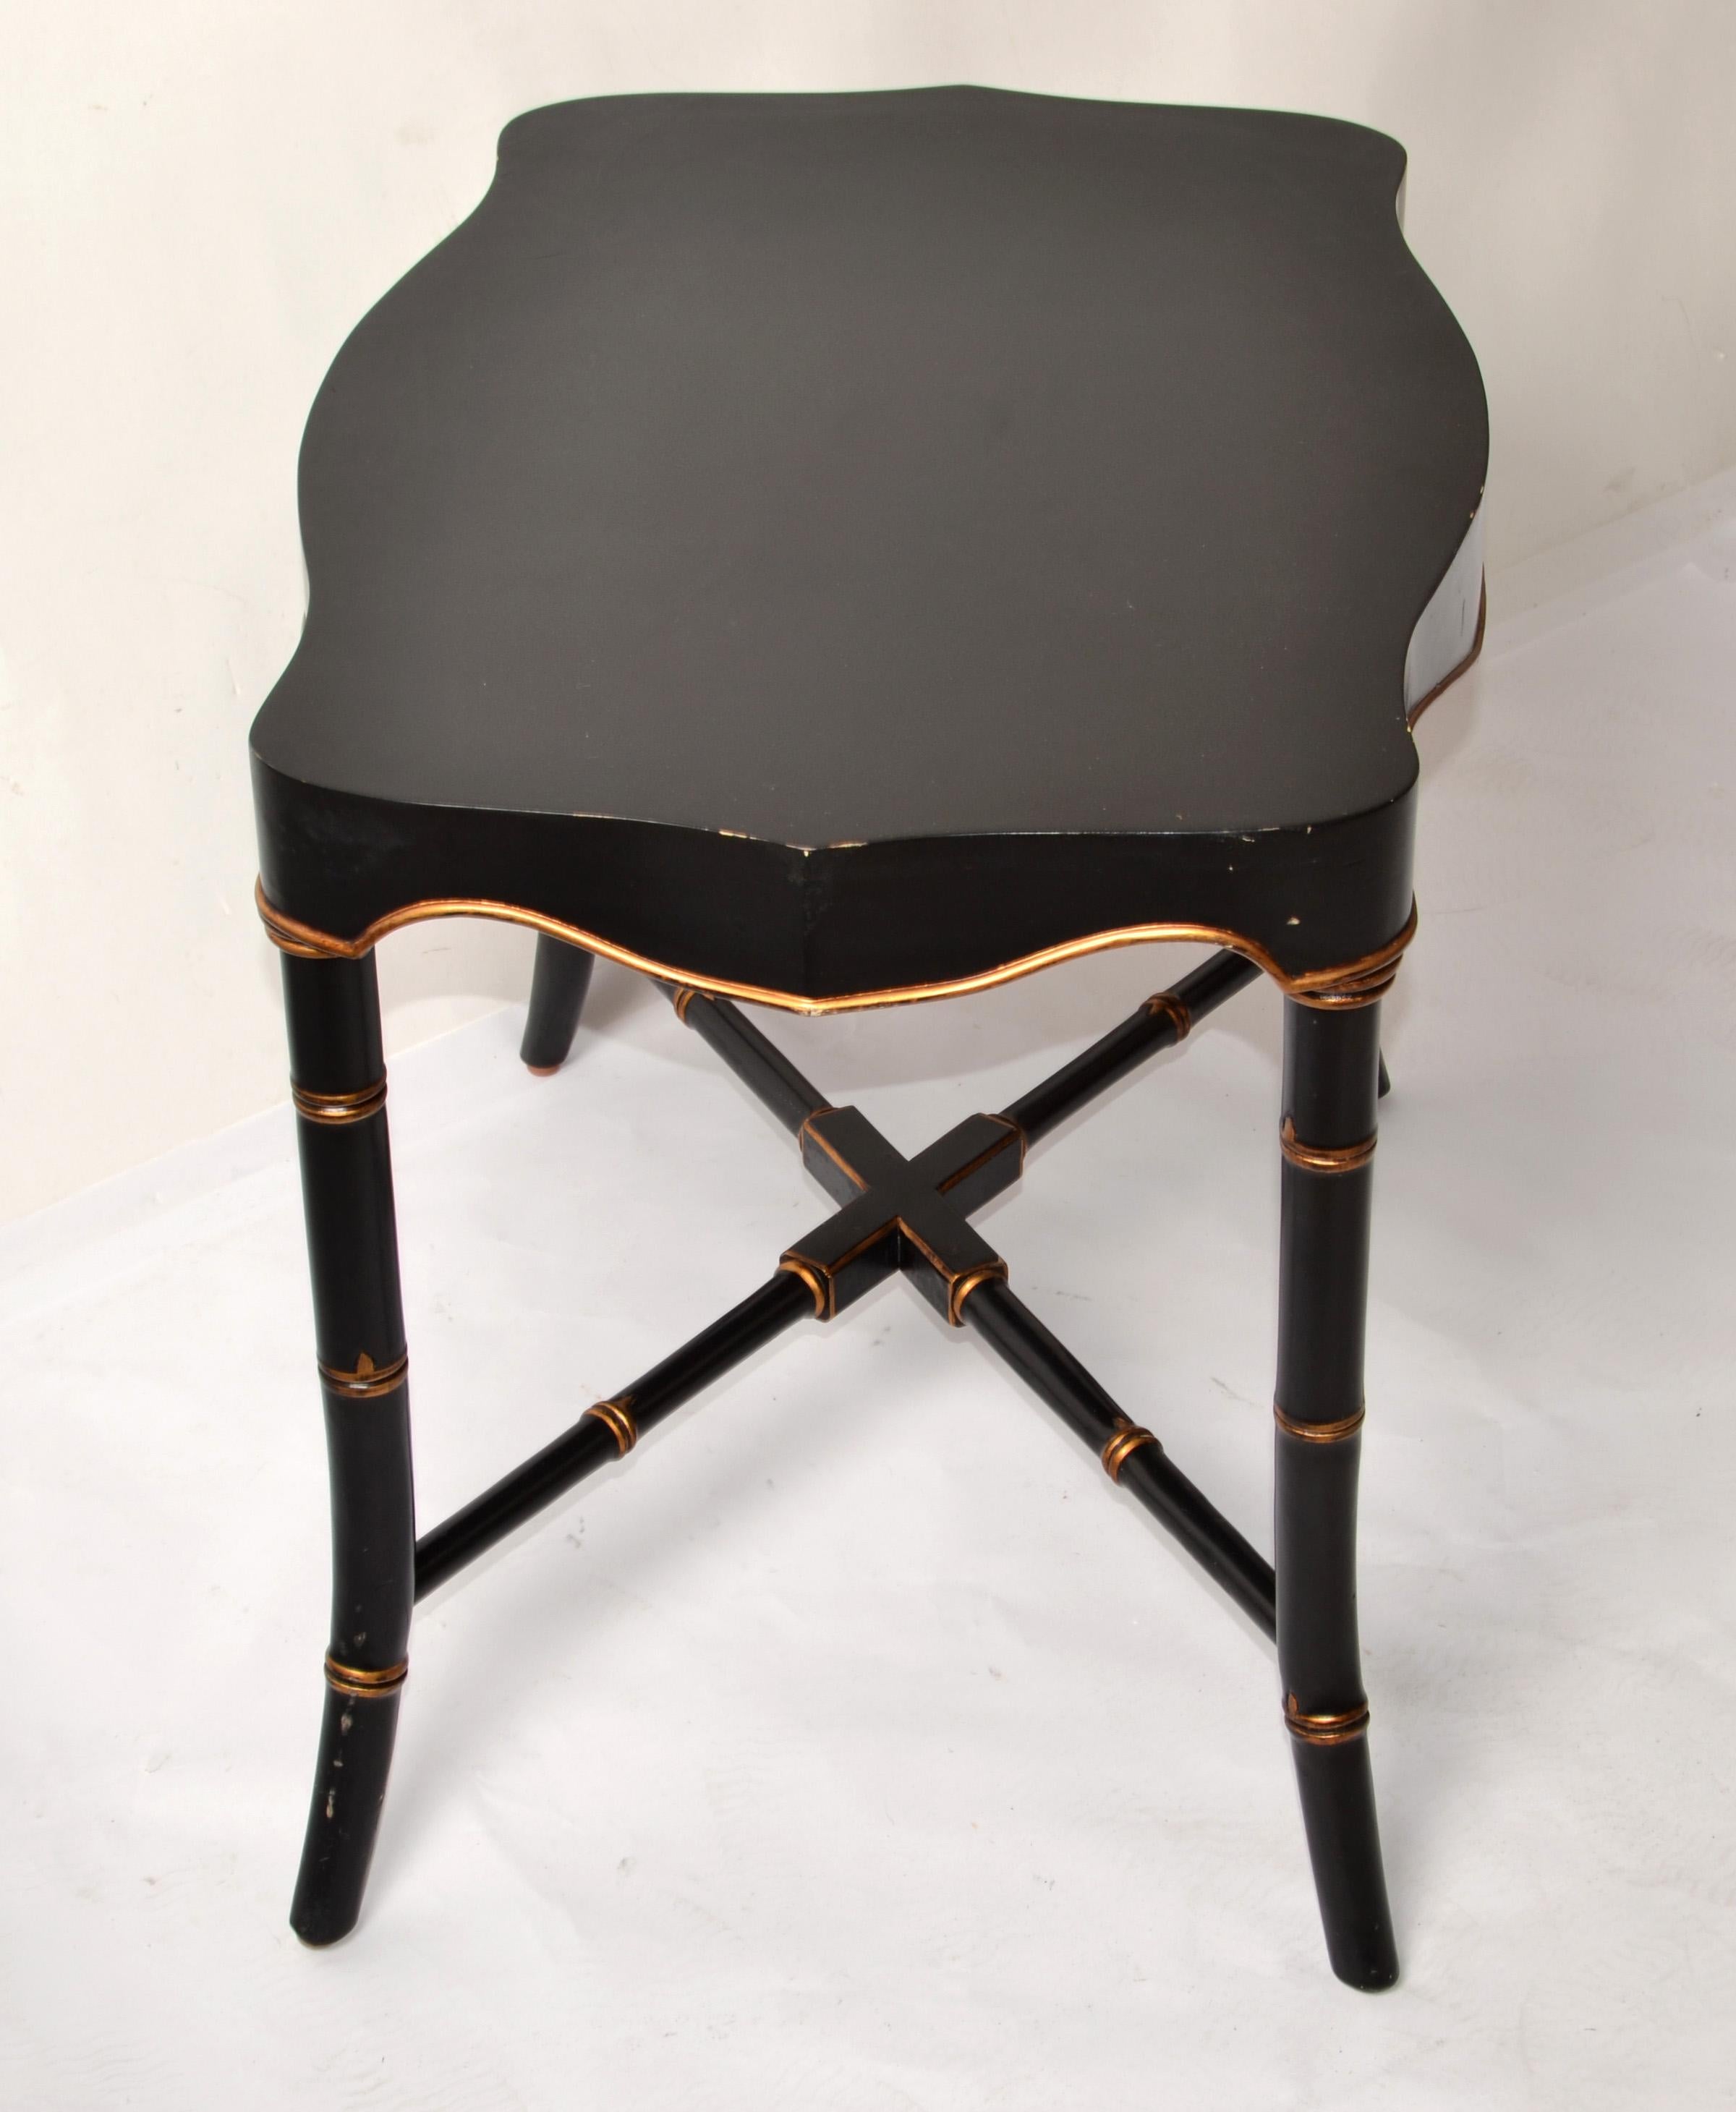 Victorian Mid-20th Century Black Gold Finish Accent Table Faux Bamboo Cross Base In Good Condition For Sale In Miami, FL